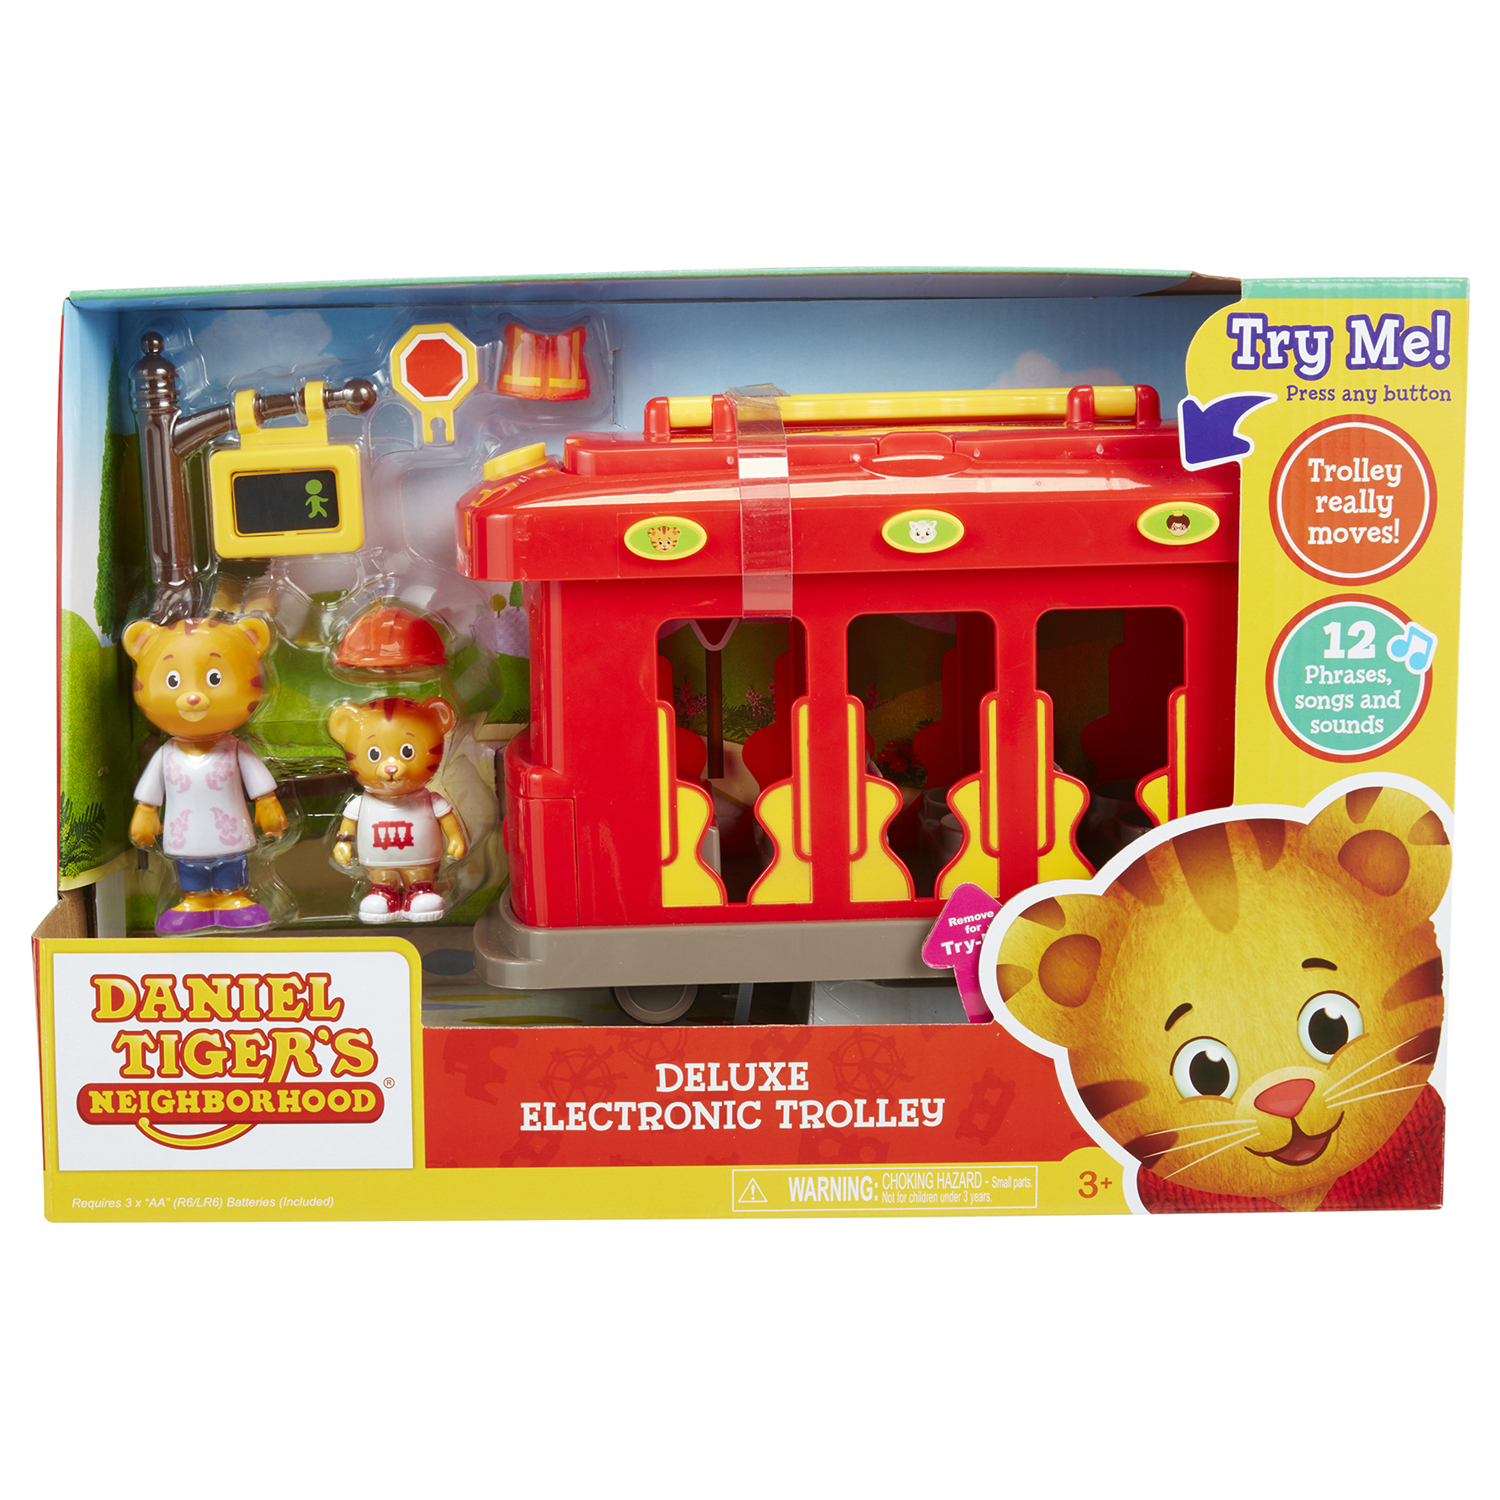 Daniel Tiger's Neighborhood-Deluxe Electronic Trolley Vehicle Car & Truck Play Vehicles' brand Daniel Tiger - image 1 of 8